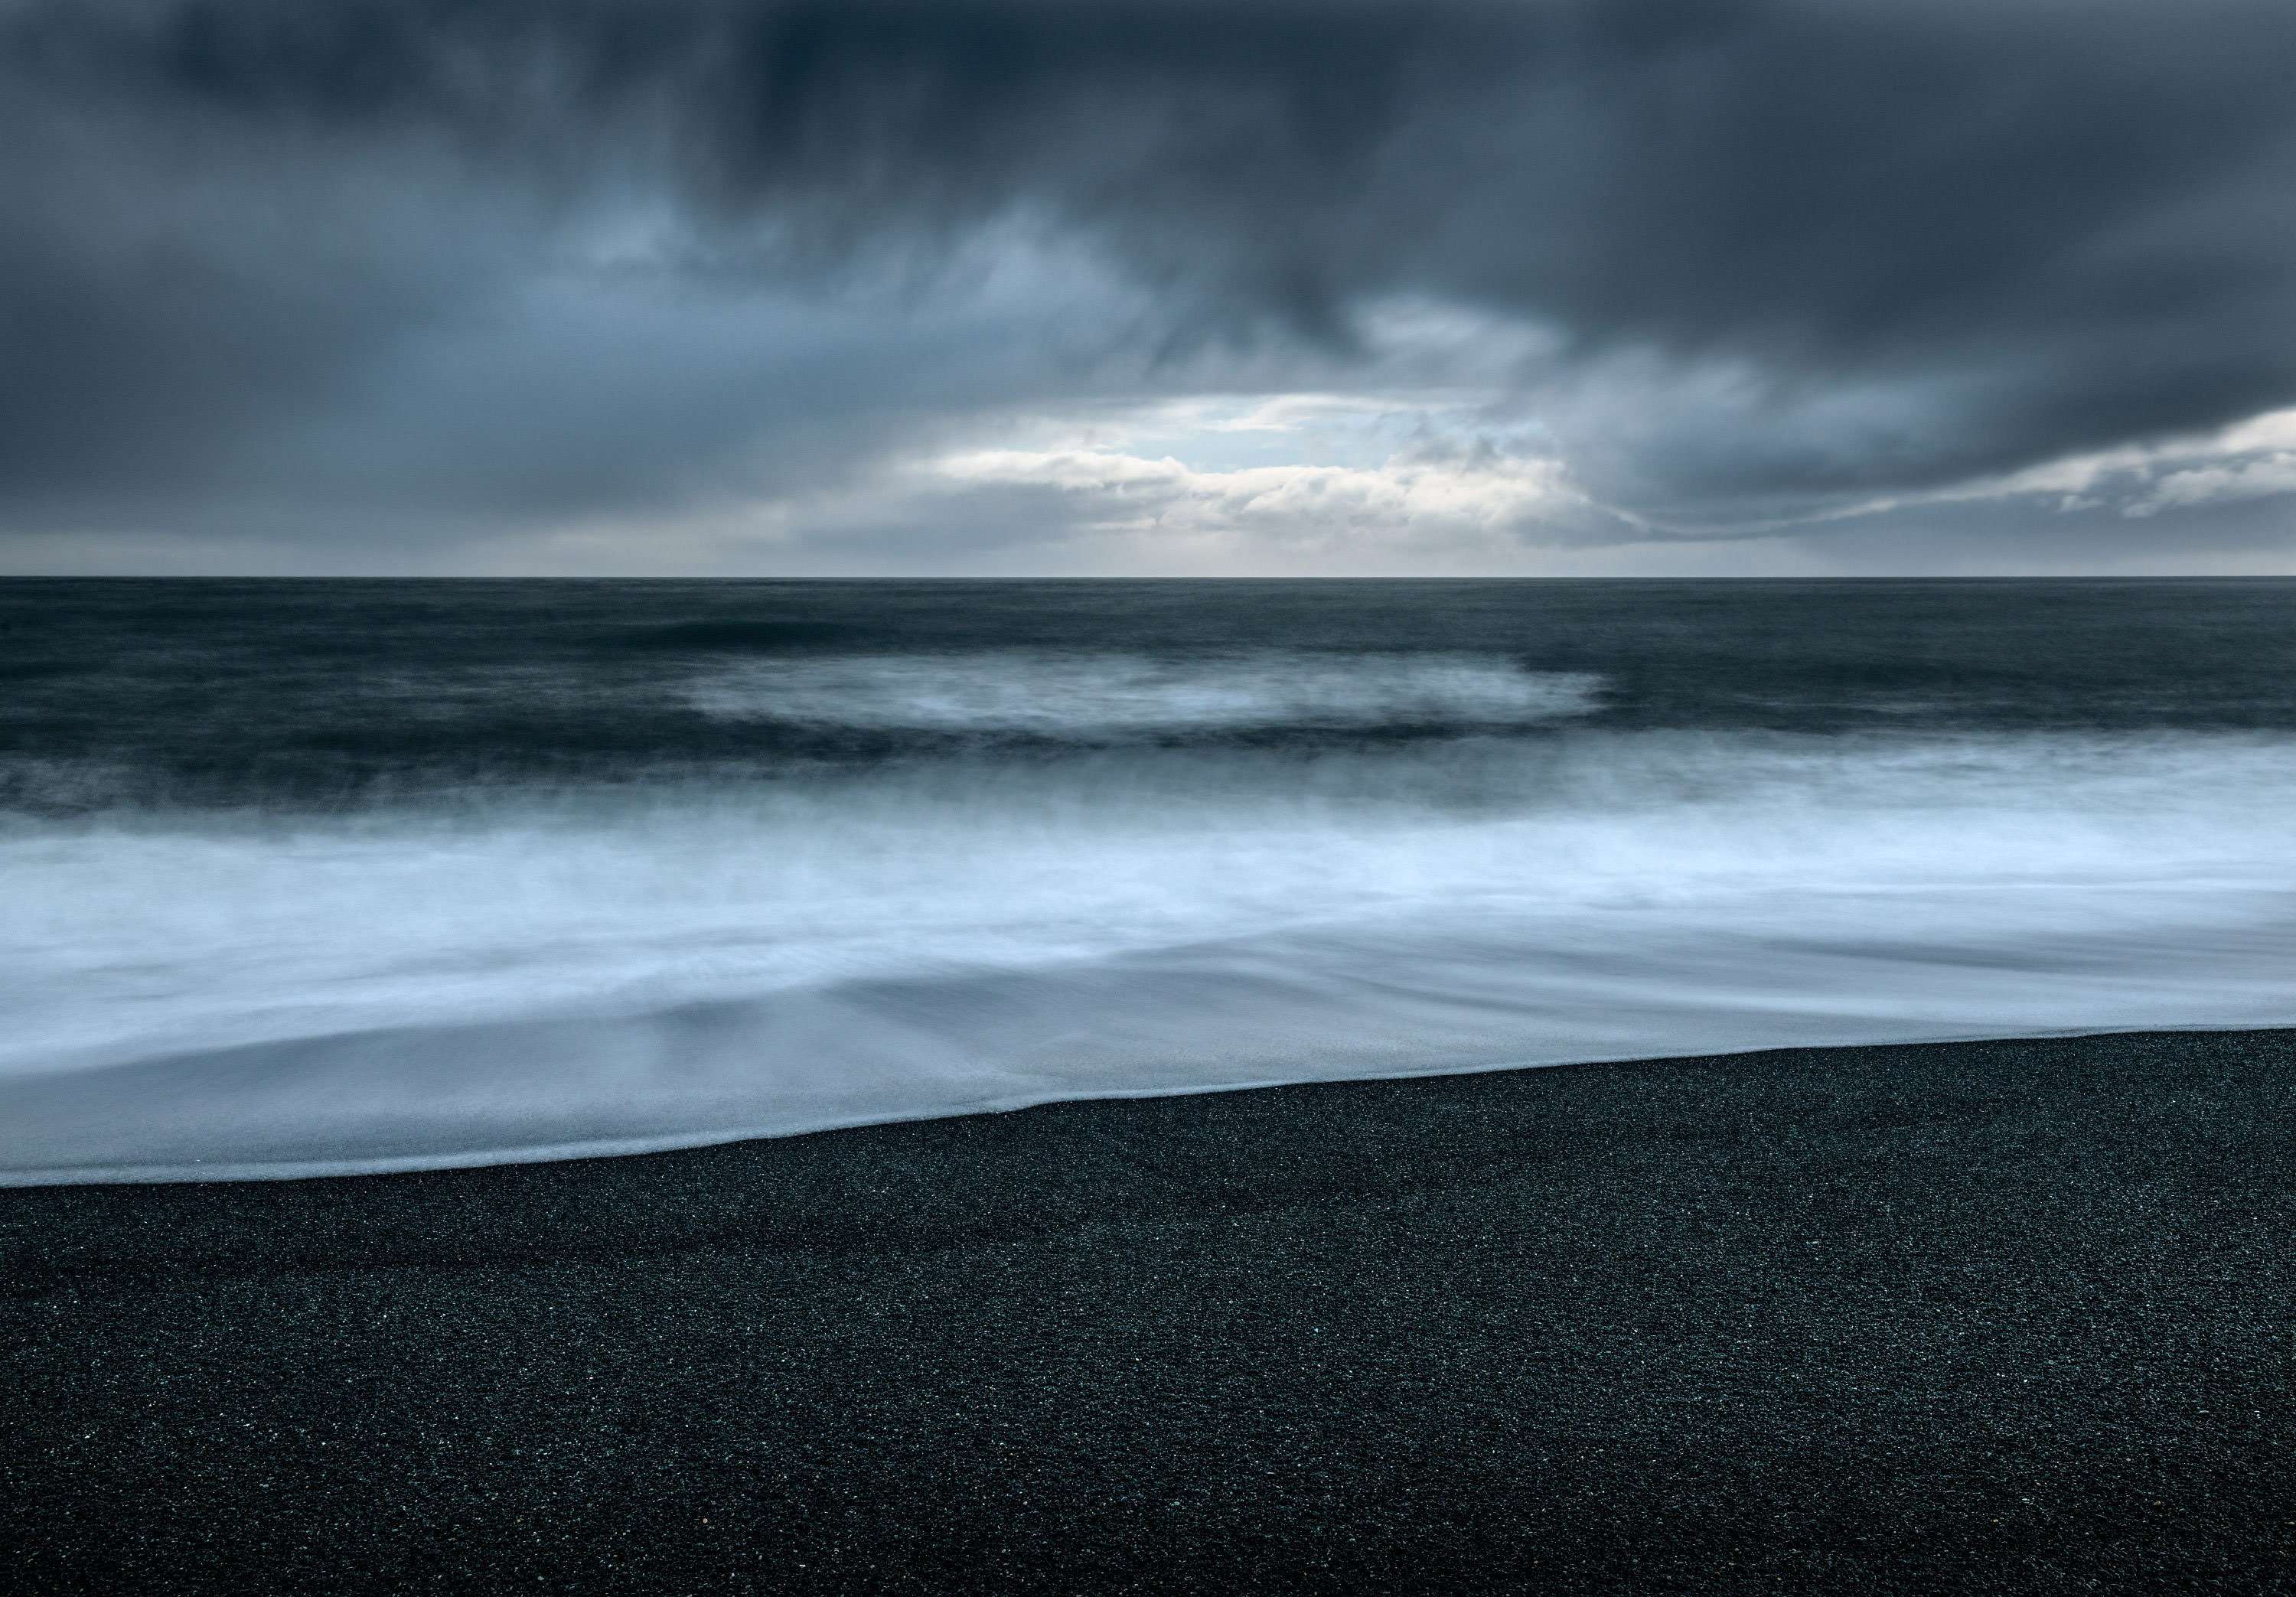 Develop Vision & Style Online Photography Workshop - Black Beach Iceland Paul Gallagher aspect2i